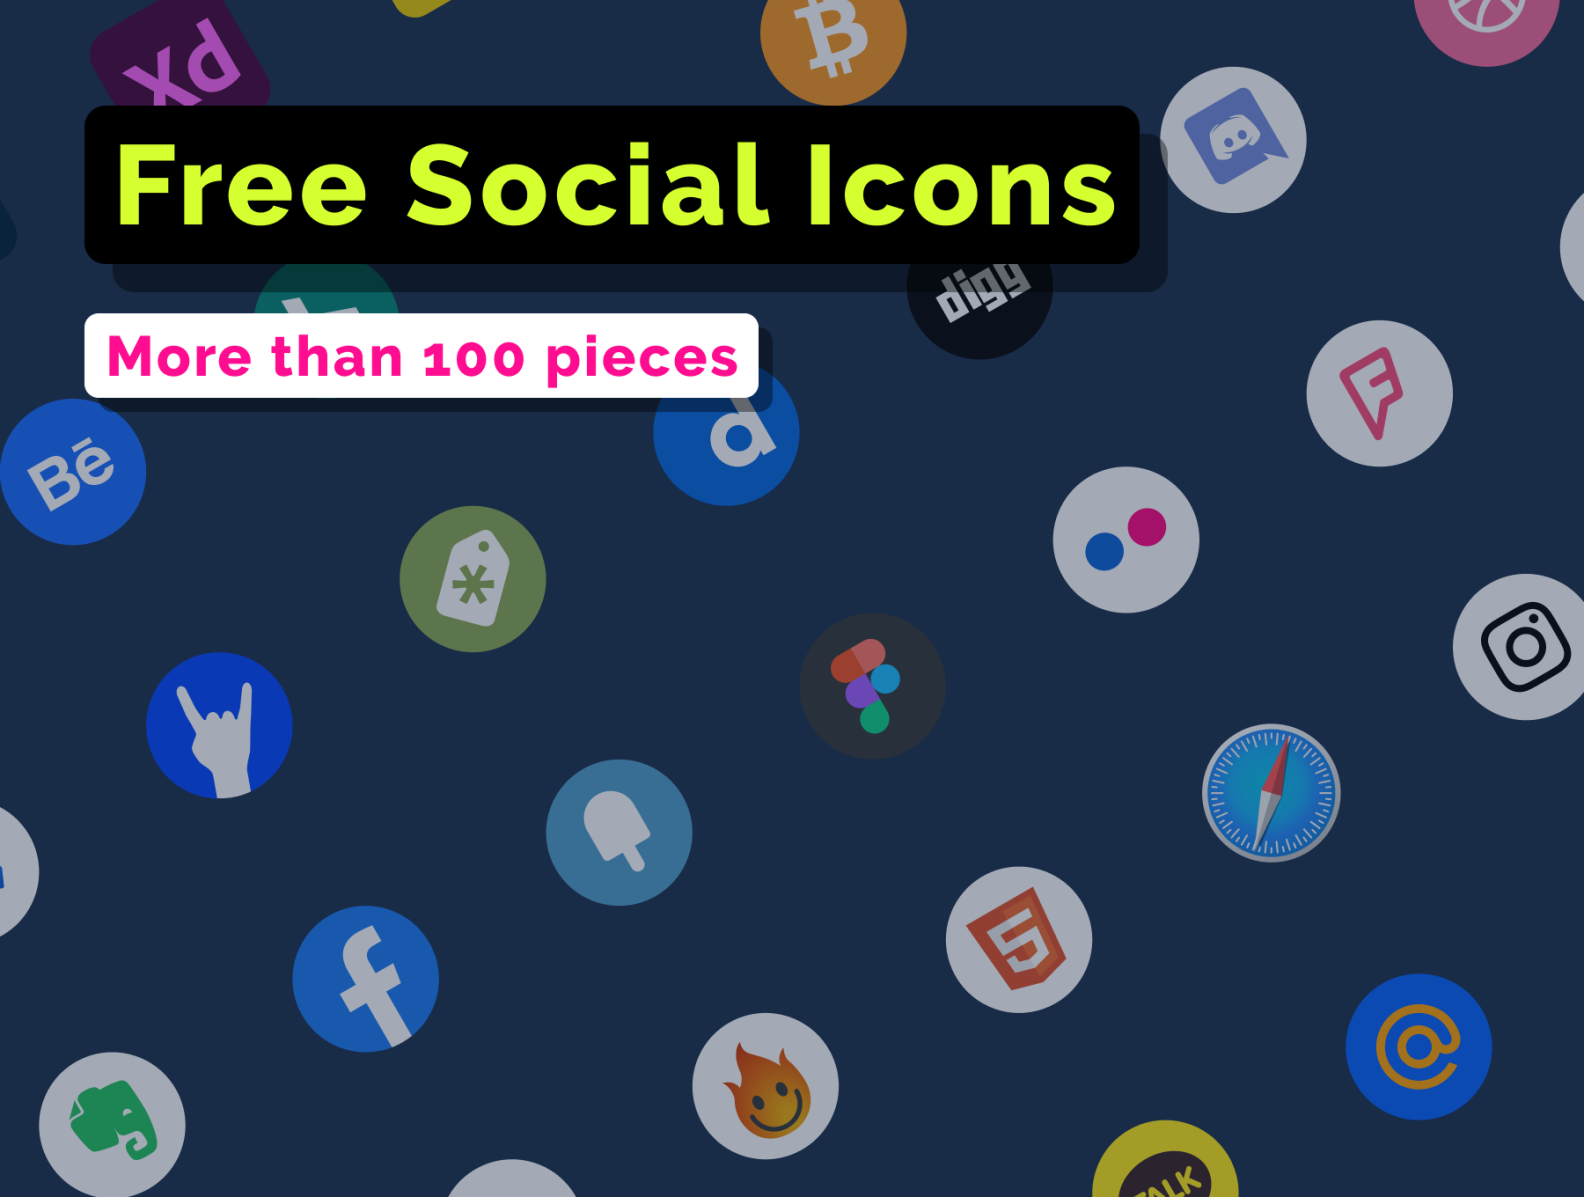 Huzzah! I updated the free icons again by Rengised on Dribbble